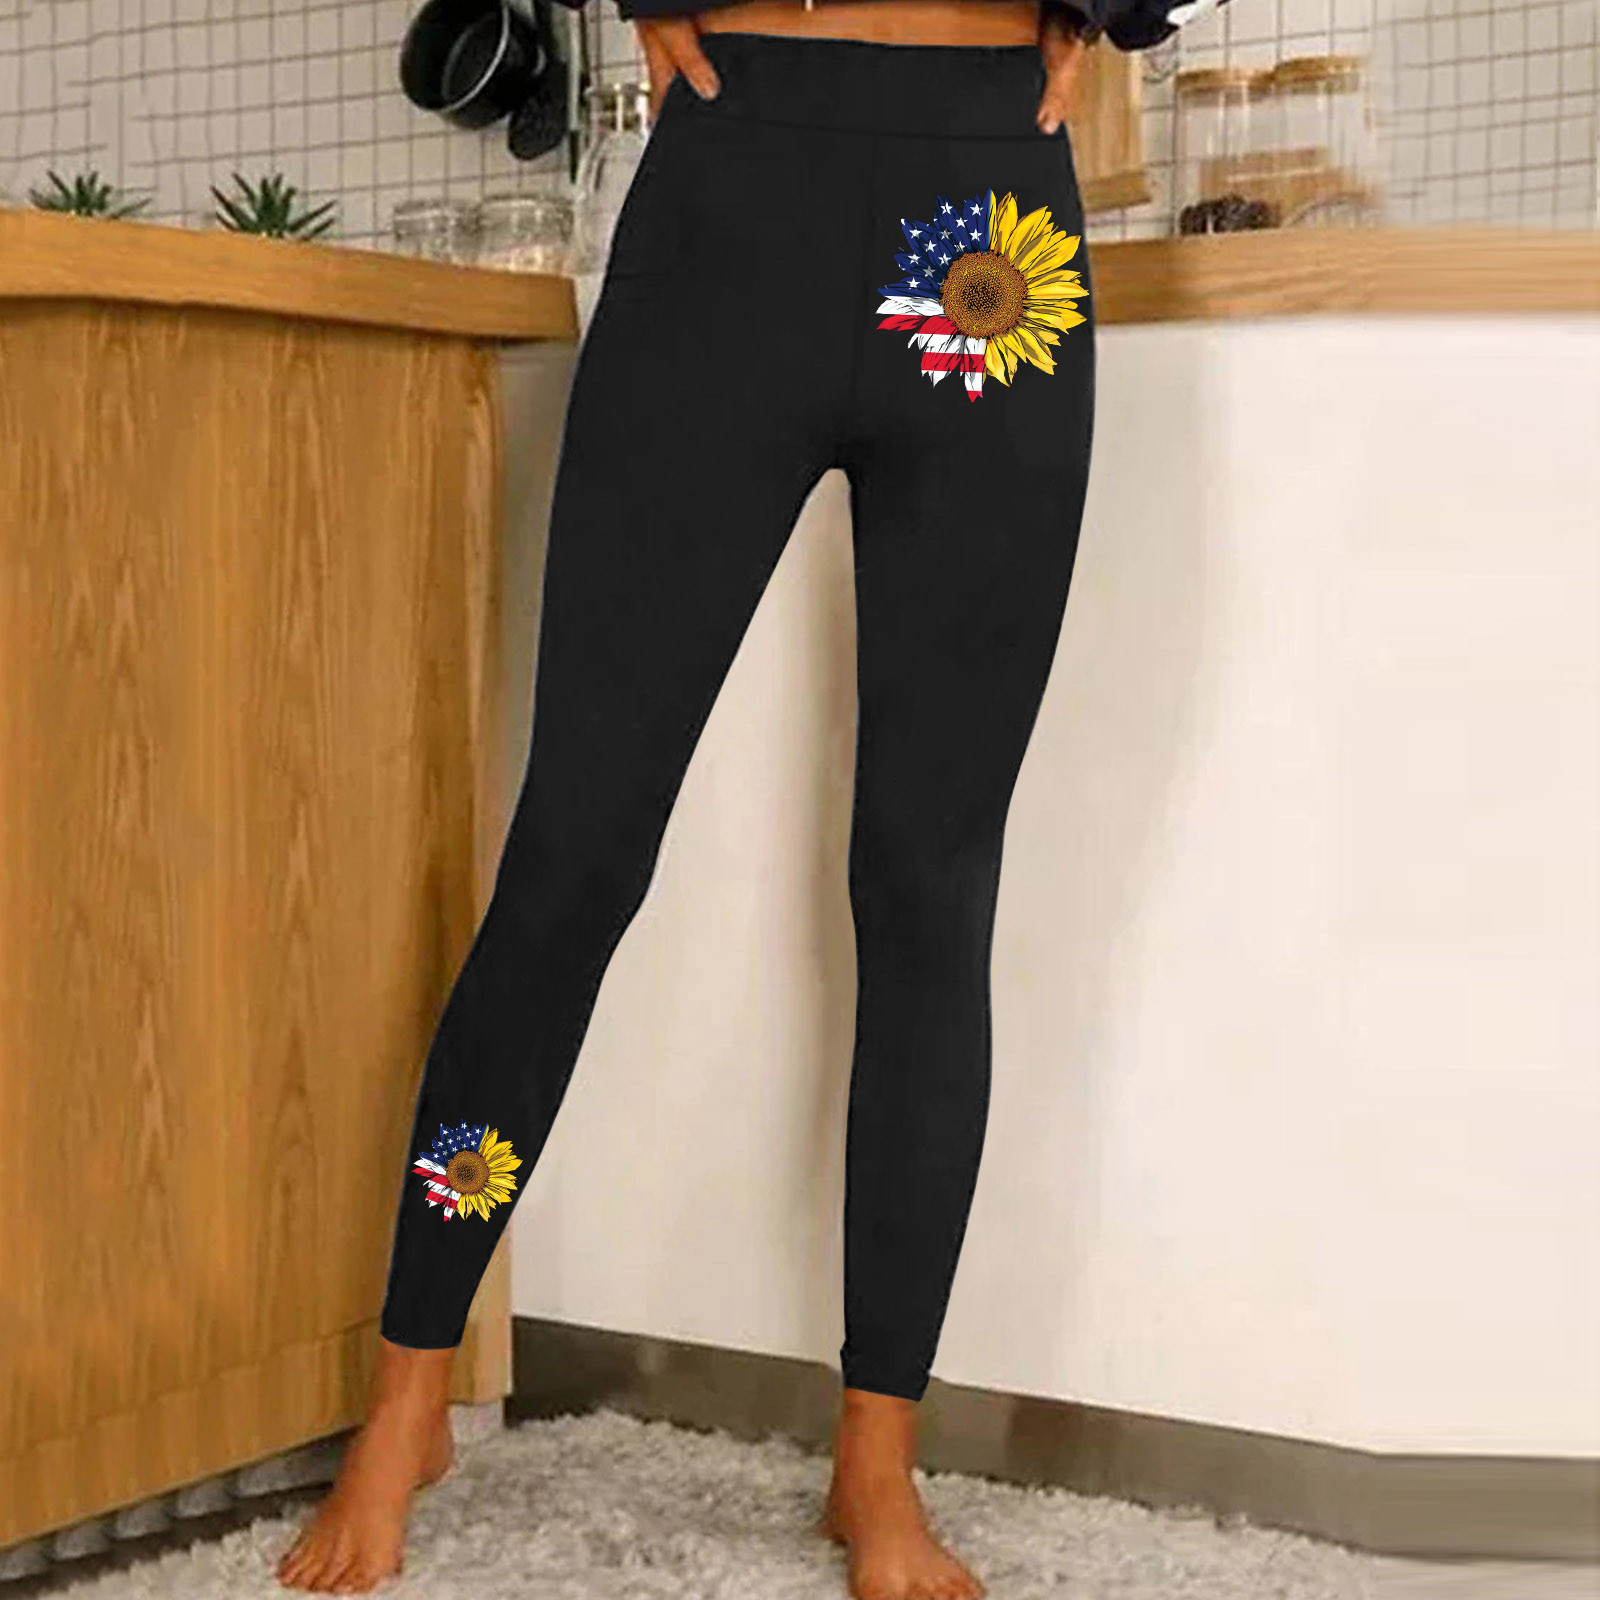 Women Casual Fashion Tight Sports Yoga Pants Colorful Flower